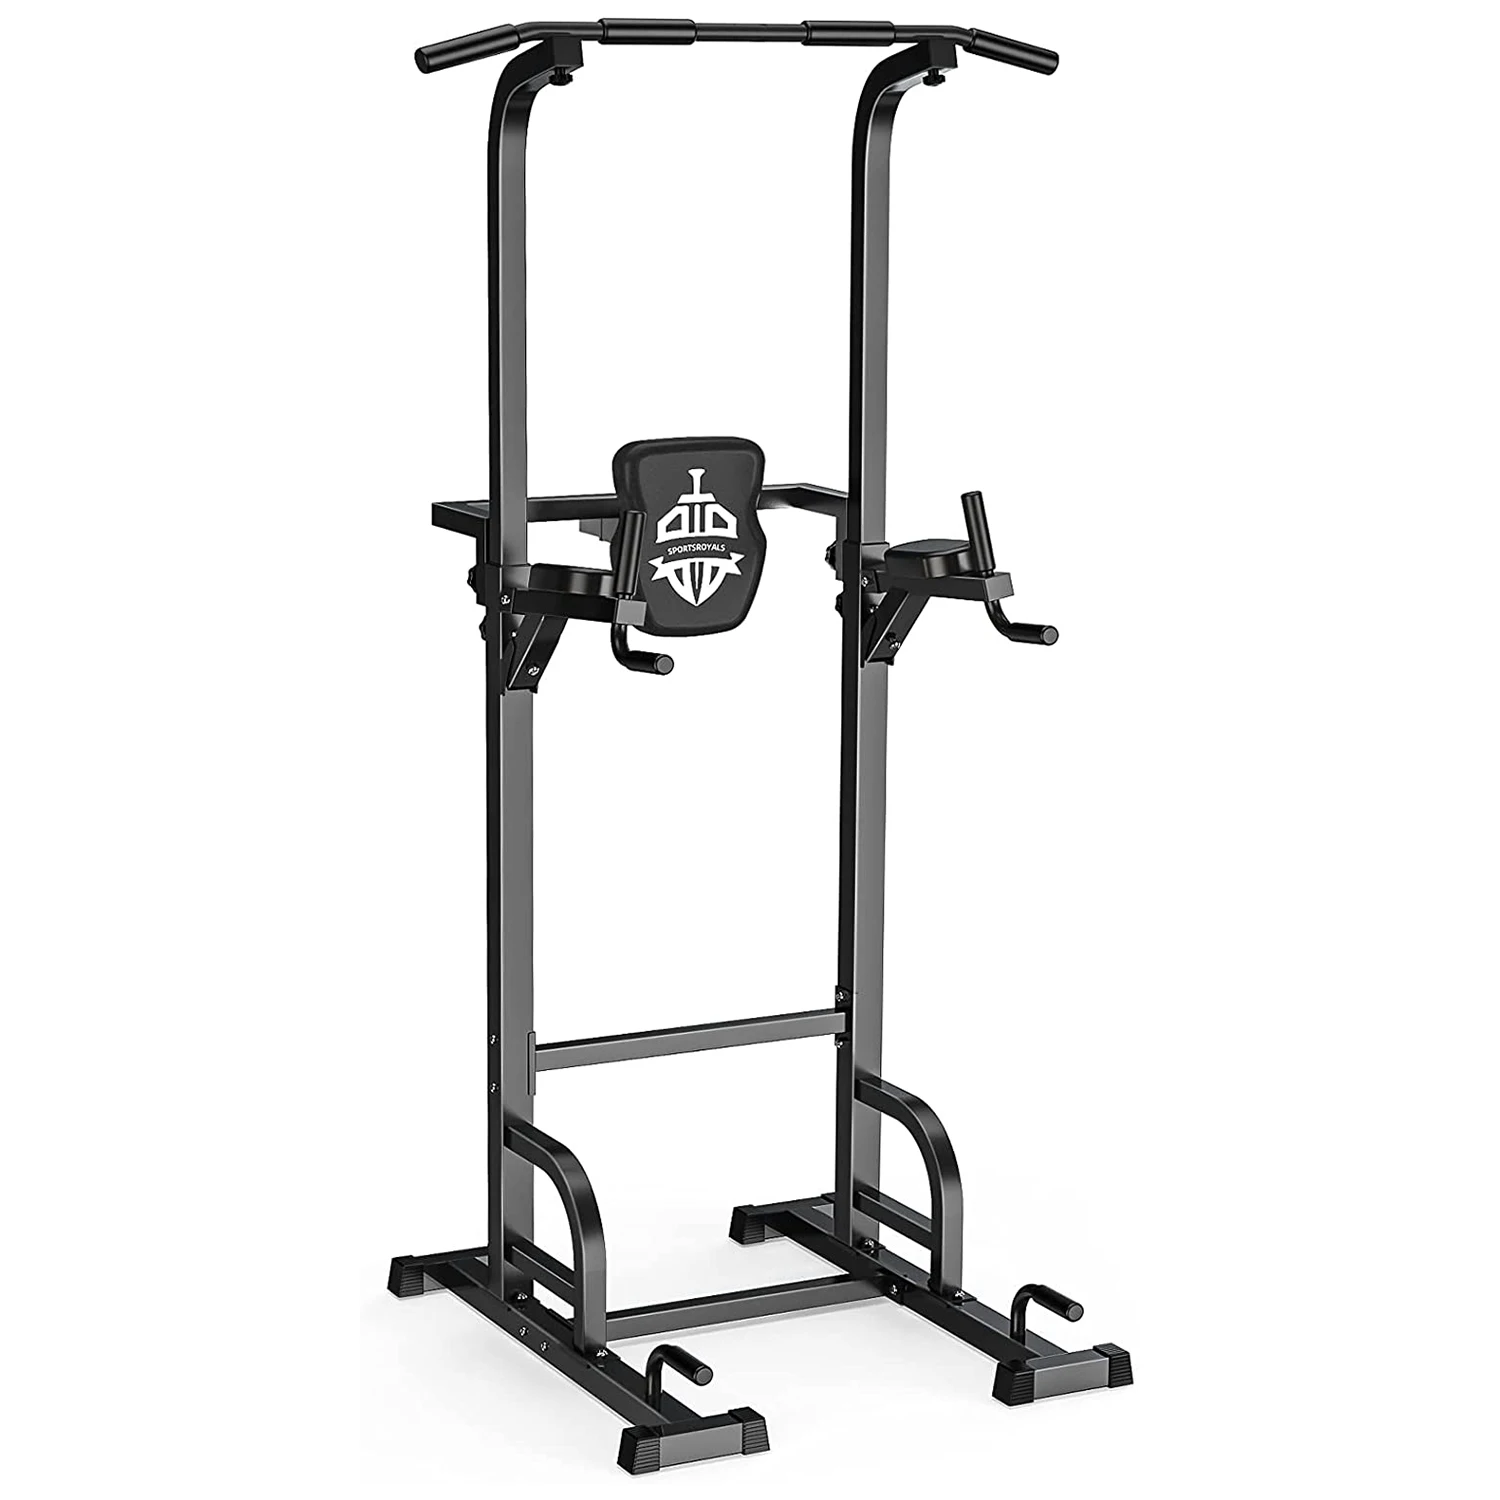 

3D Max Customized Multi-Function Home Strength Training Fitness Power Tower Station Adjustable Height Dip Paralle Pull Up Bar